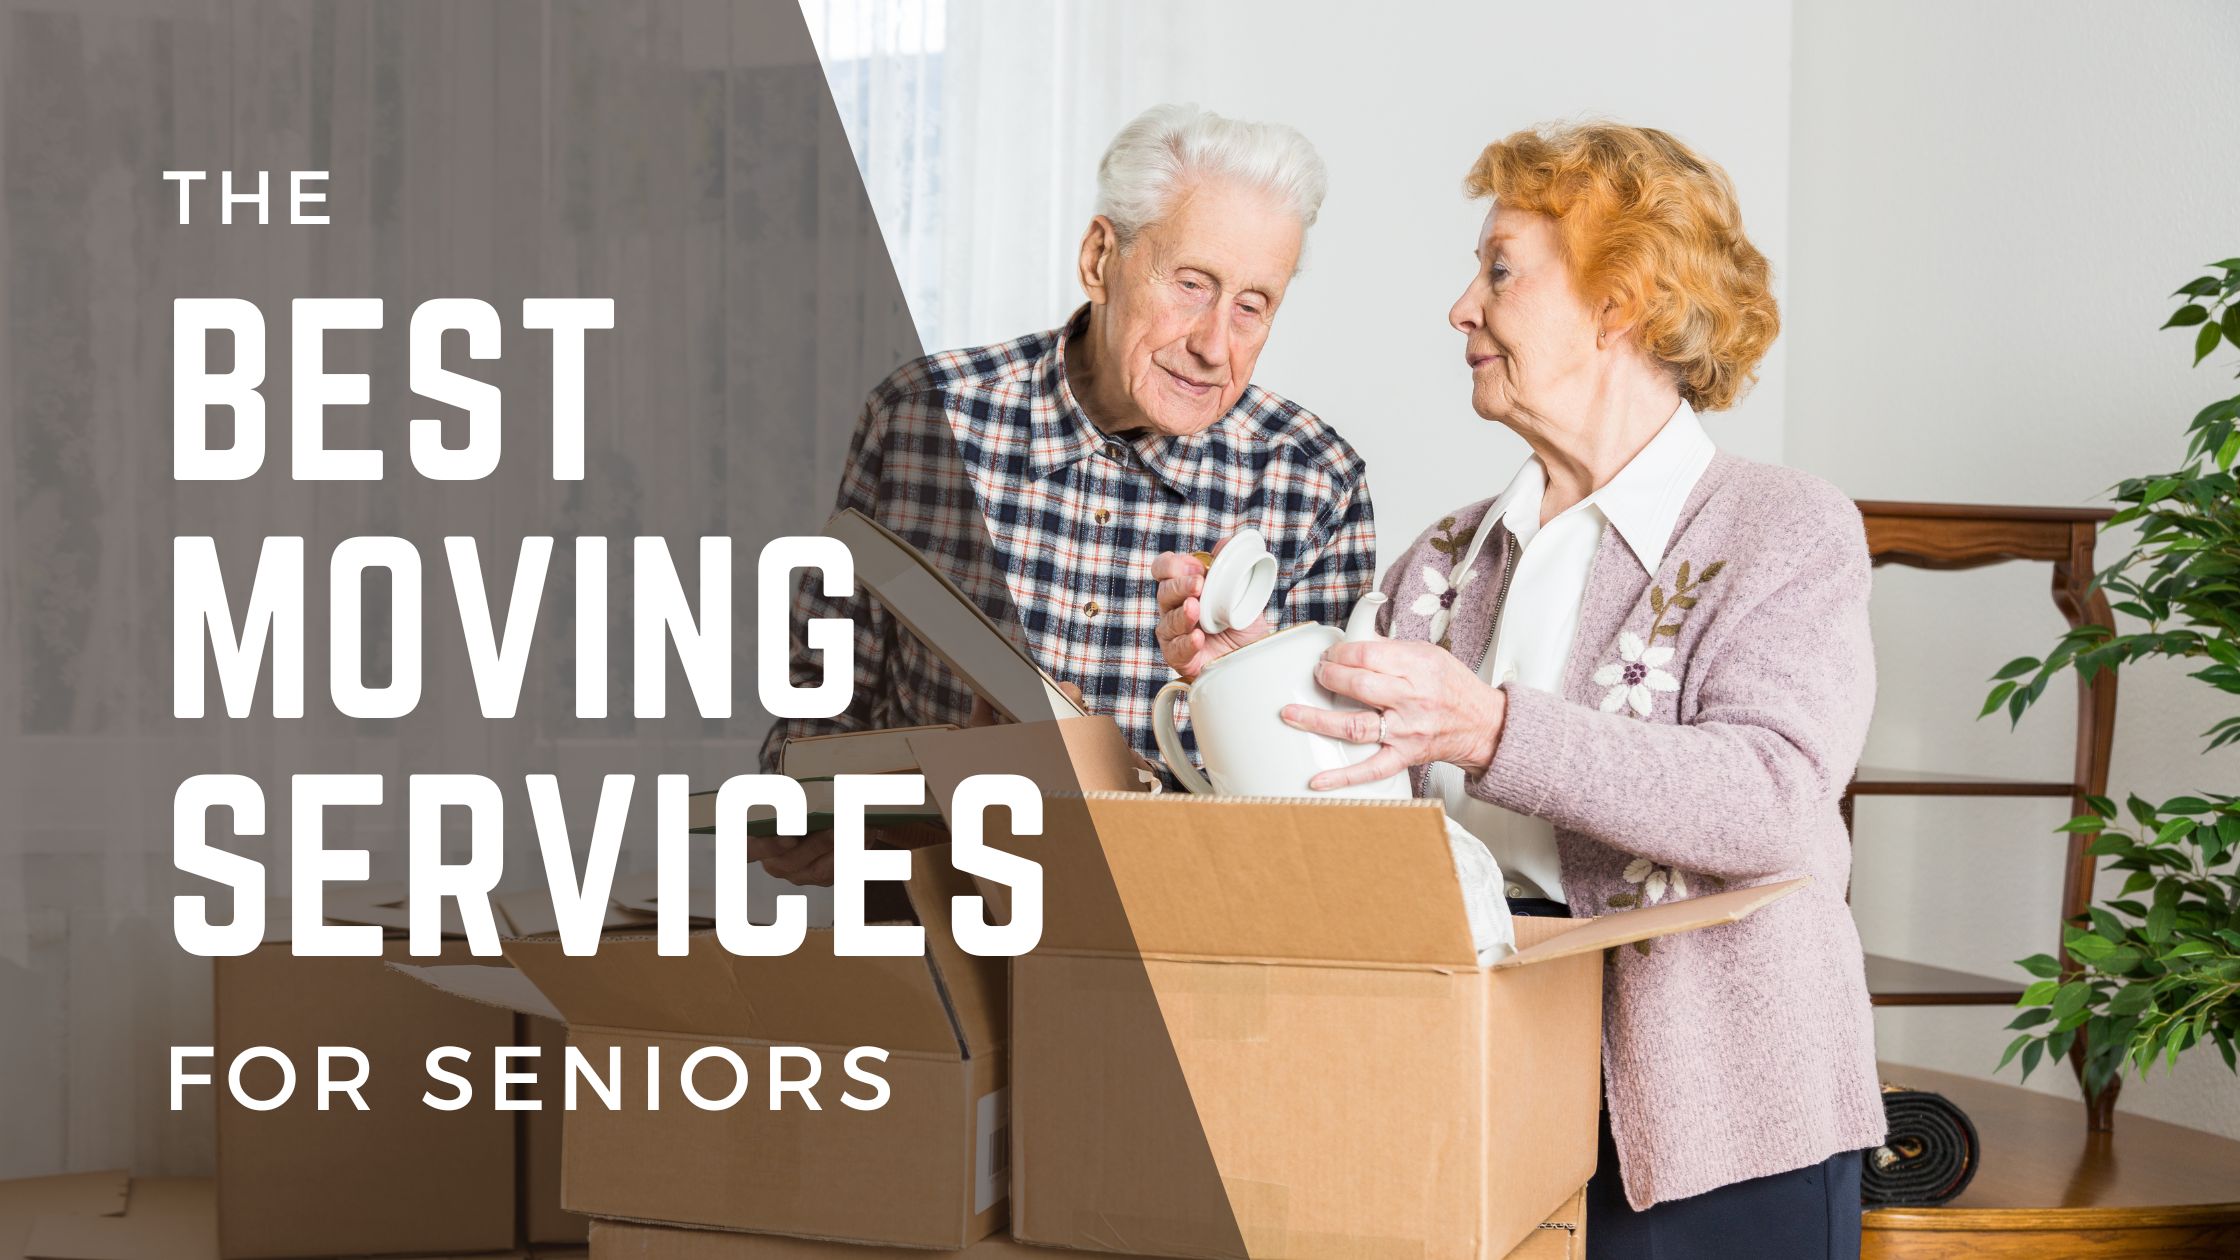 The Best Moving Services for Seniors